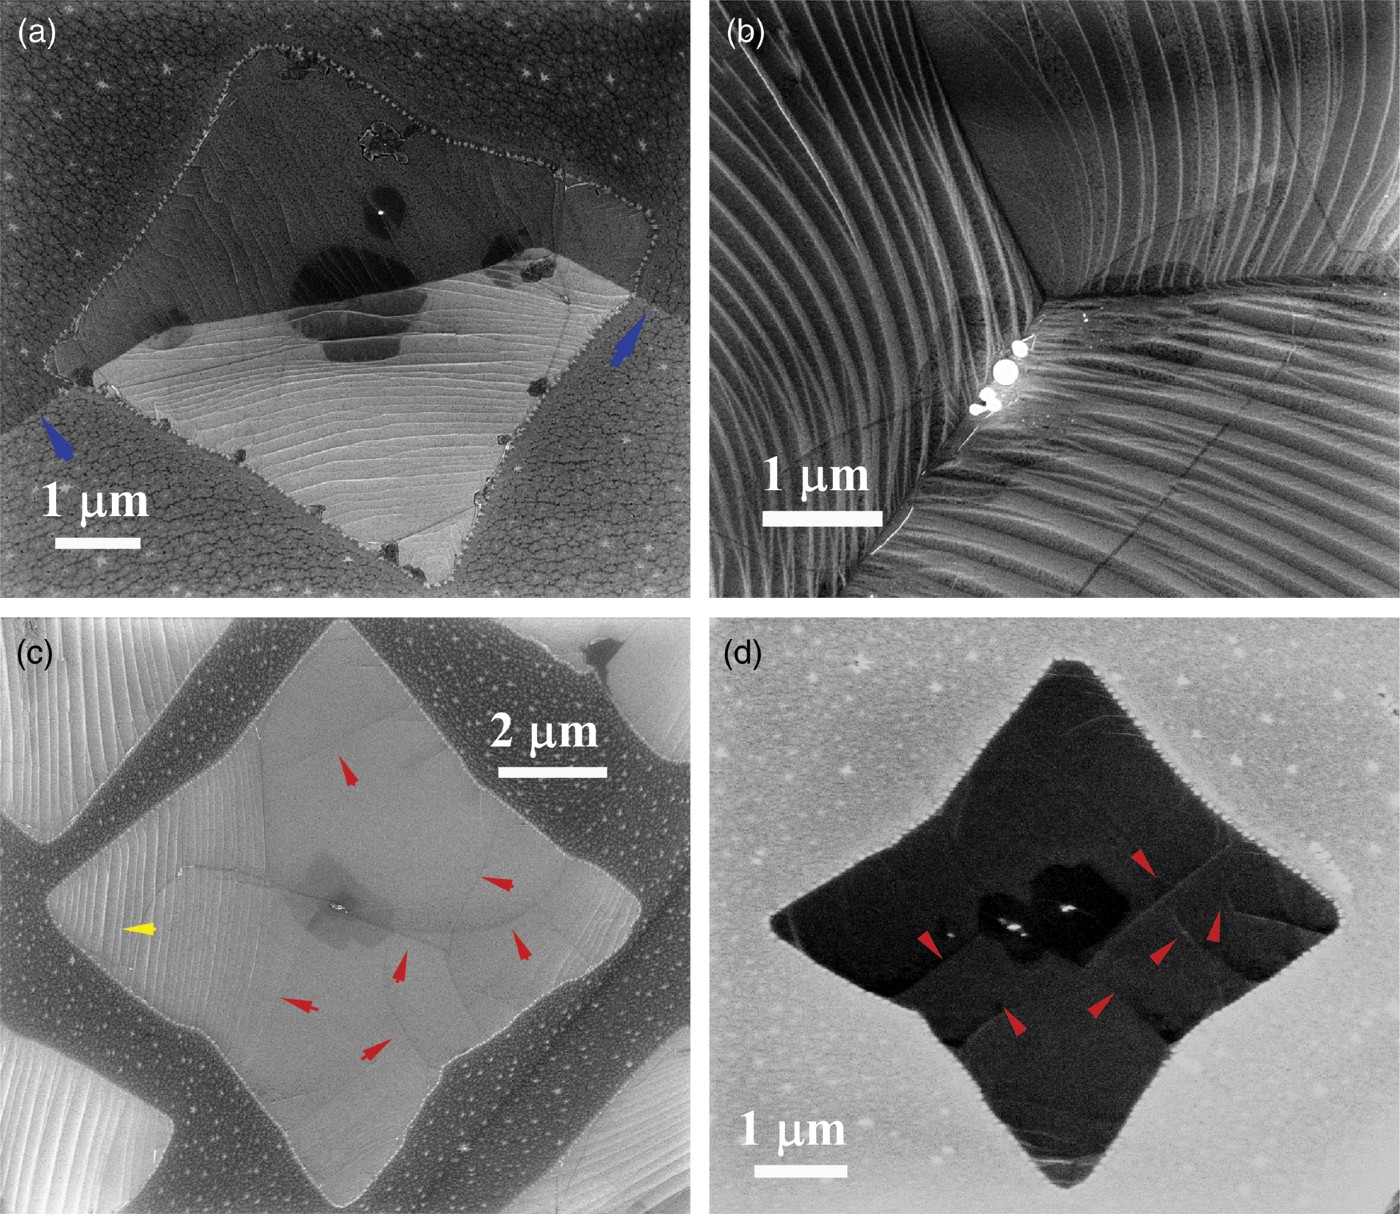 Figure 2. Typical high-magnification SEM images of ‘square’ graphene domains. (a) A ‘square’ graphene domain across the curved Cu grain boundary (blue arrows). (b) SEM image showing the difference in the directions of wrinkle stripes in the crossing point of three Cu grain boundaries. (c, d) Individual square graphene domains with wrinkles or cracks.